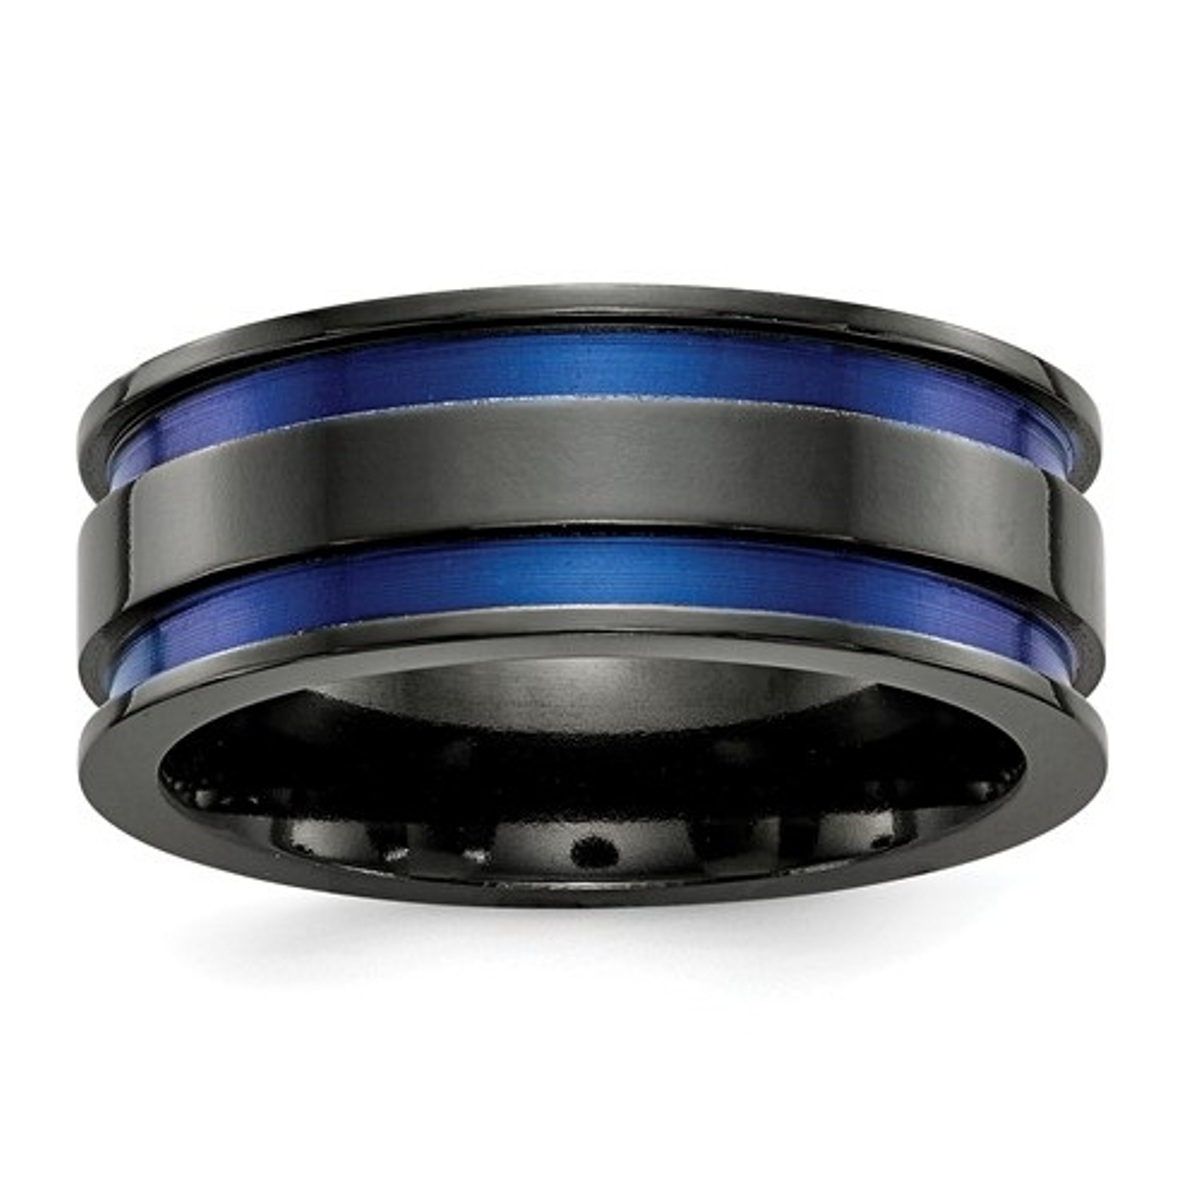  Black Ti Grooved Blue Anodized 8.5mm Band